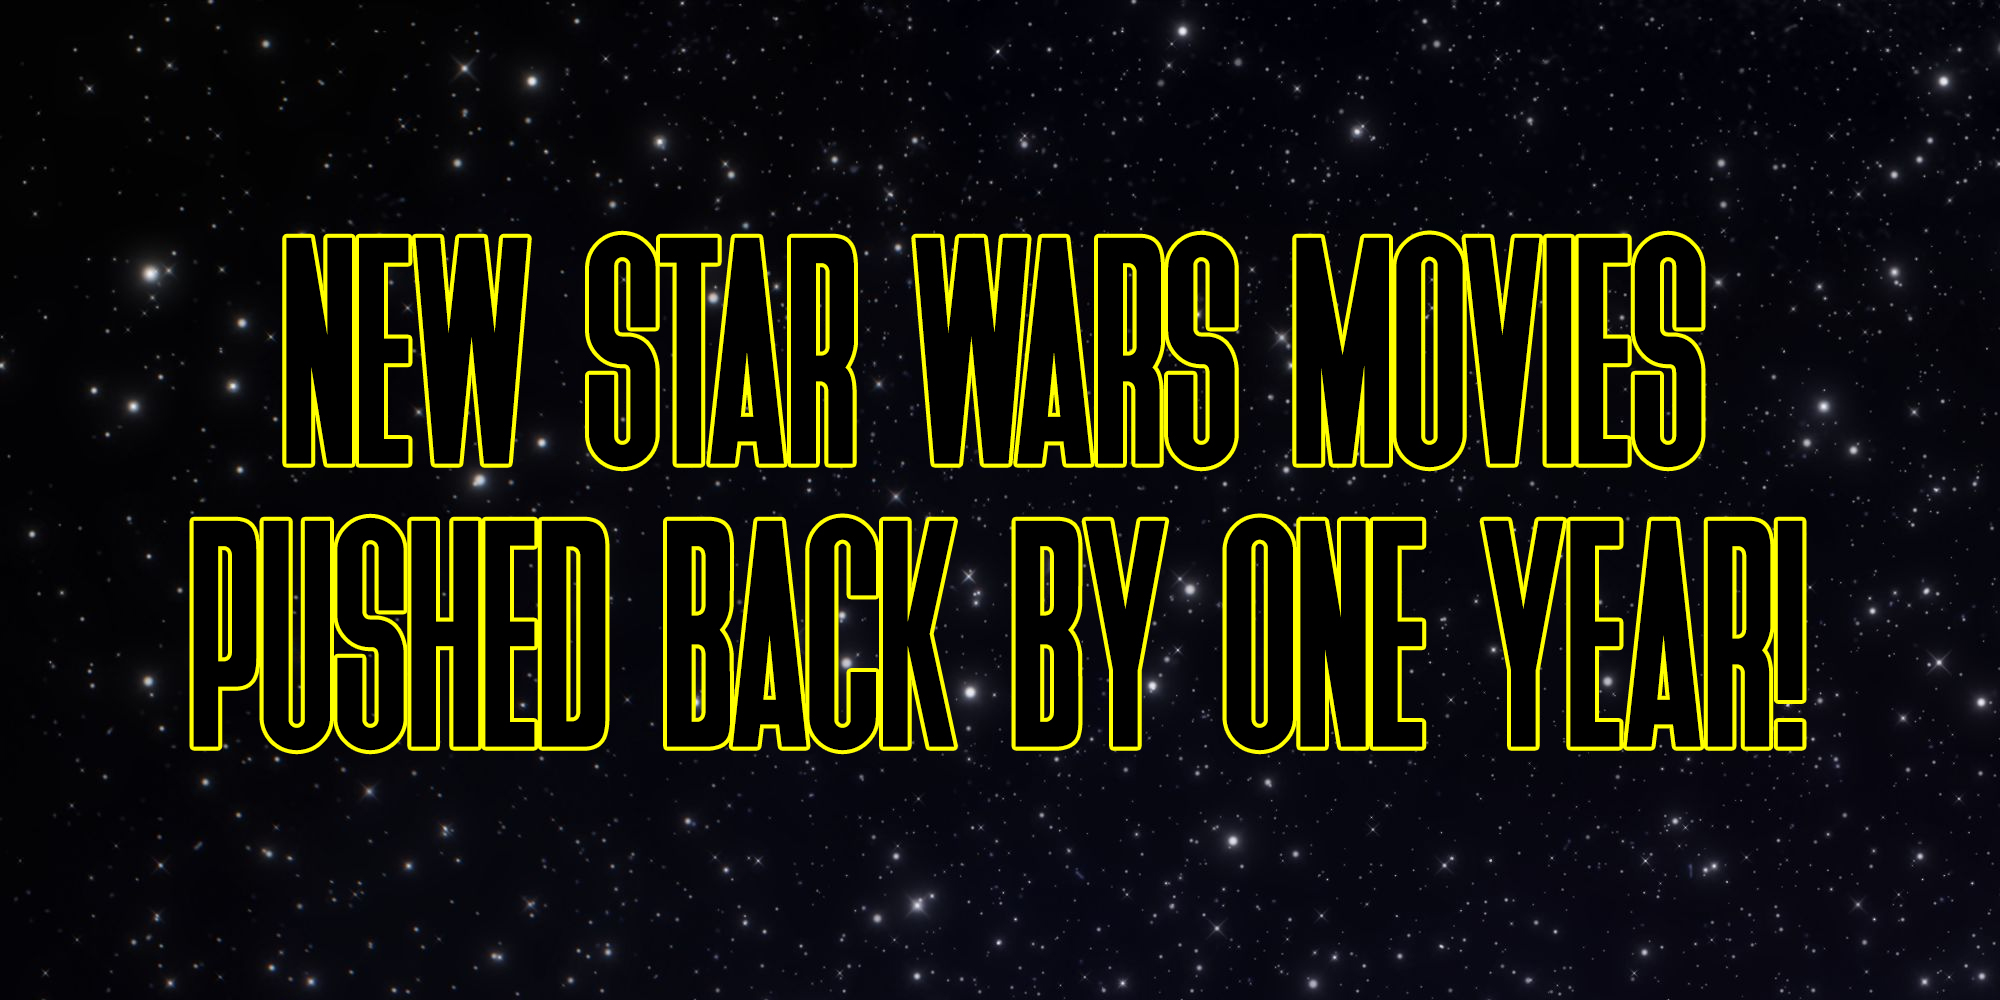 Star Wars movies are delayed